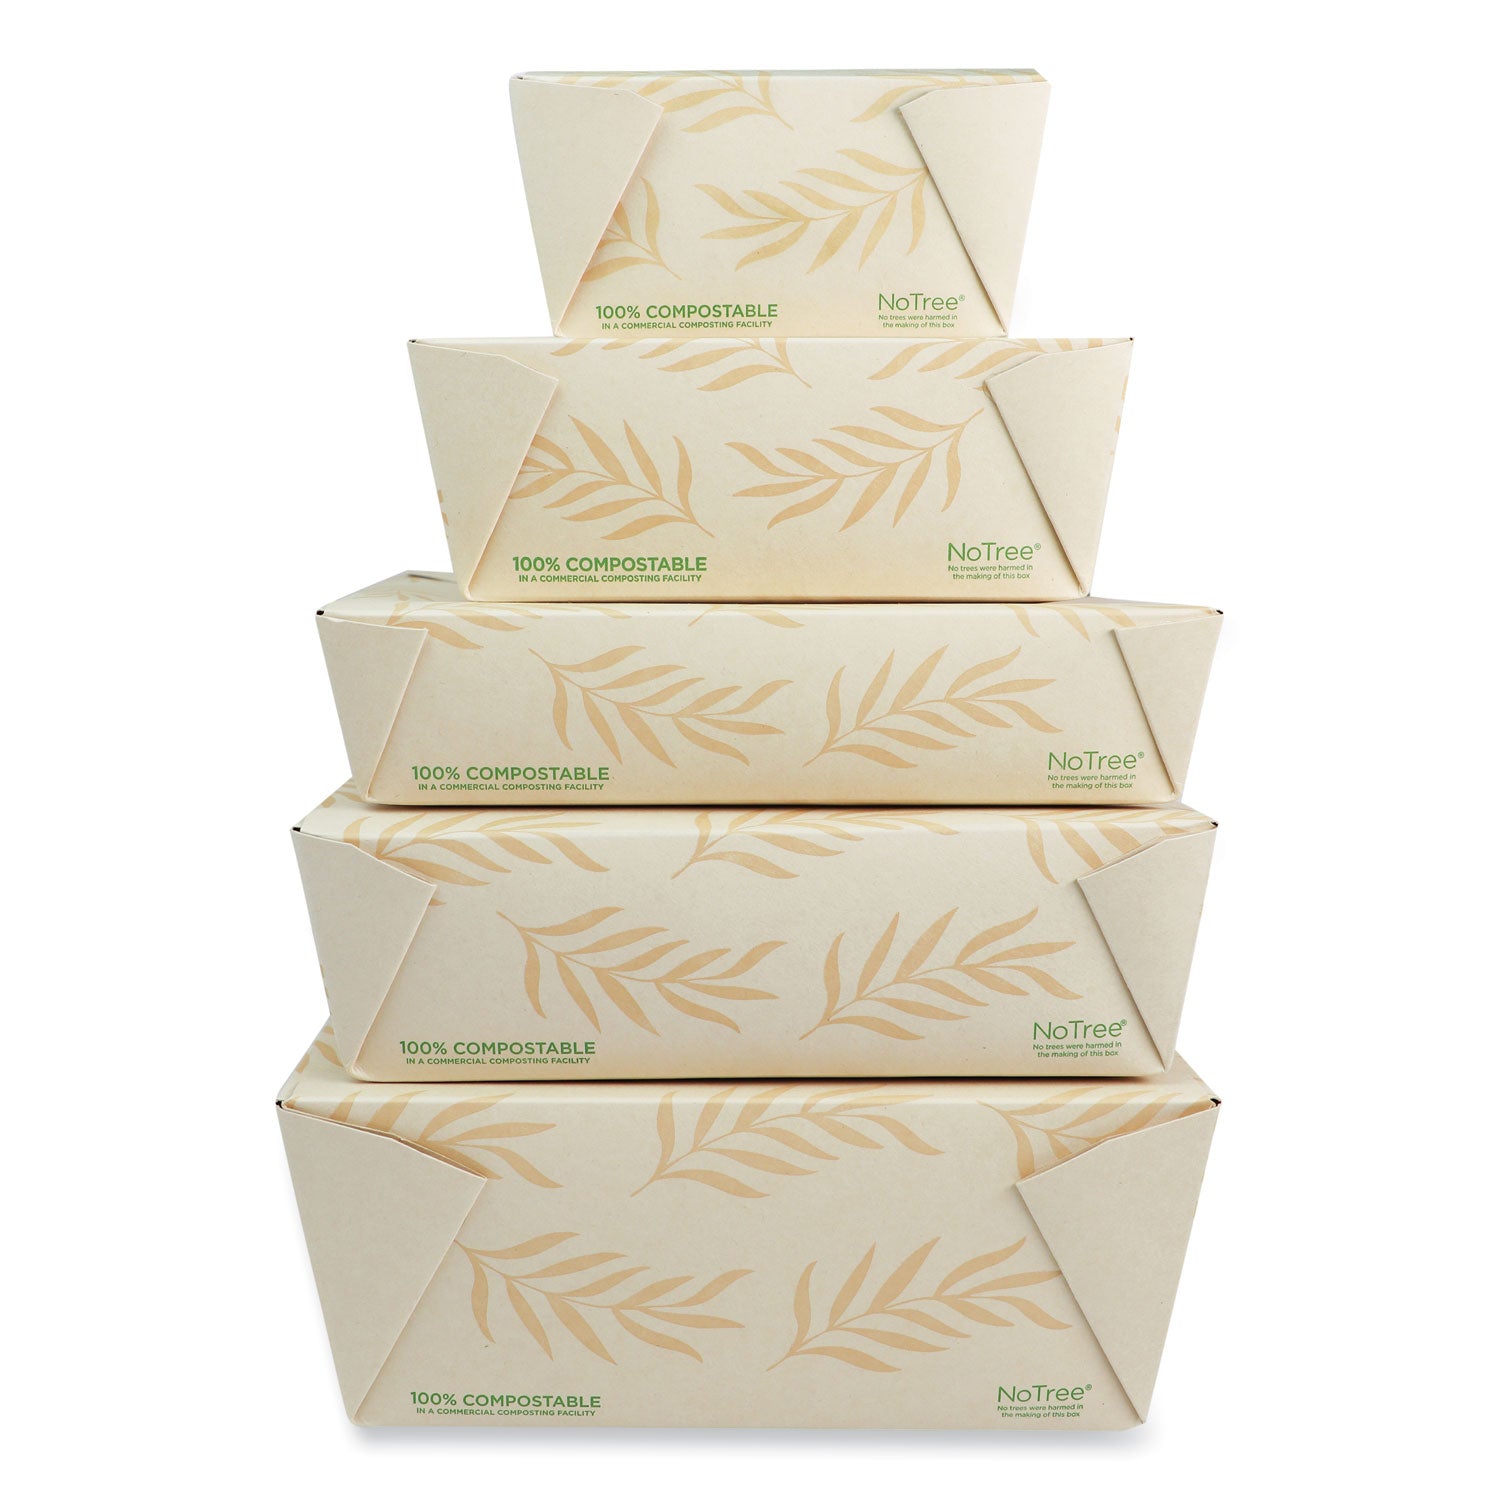 no-tree-folded-takeout-containers-26-oz-42-x-52-x-25-natural-sugarcane-450-carton_wortont1 - 2